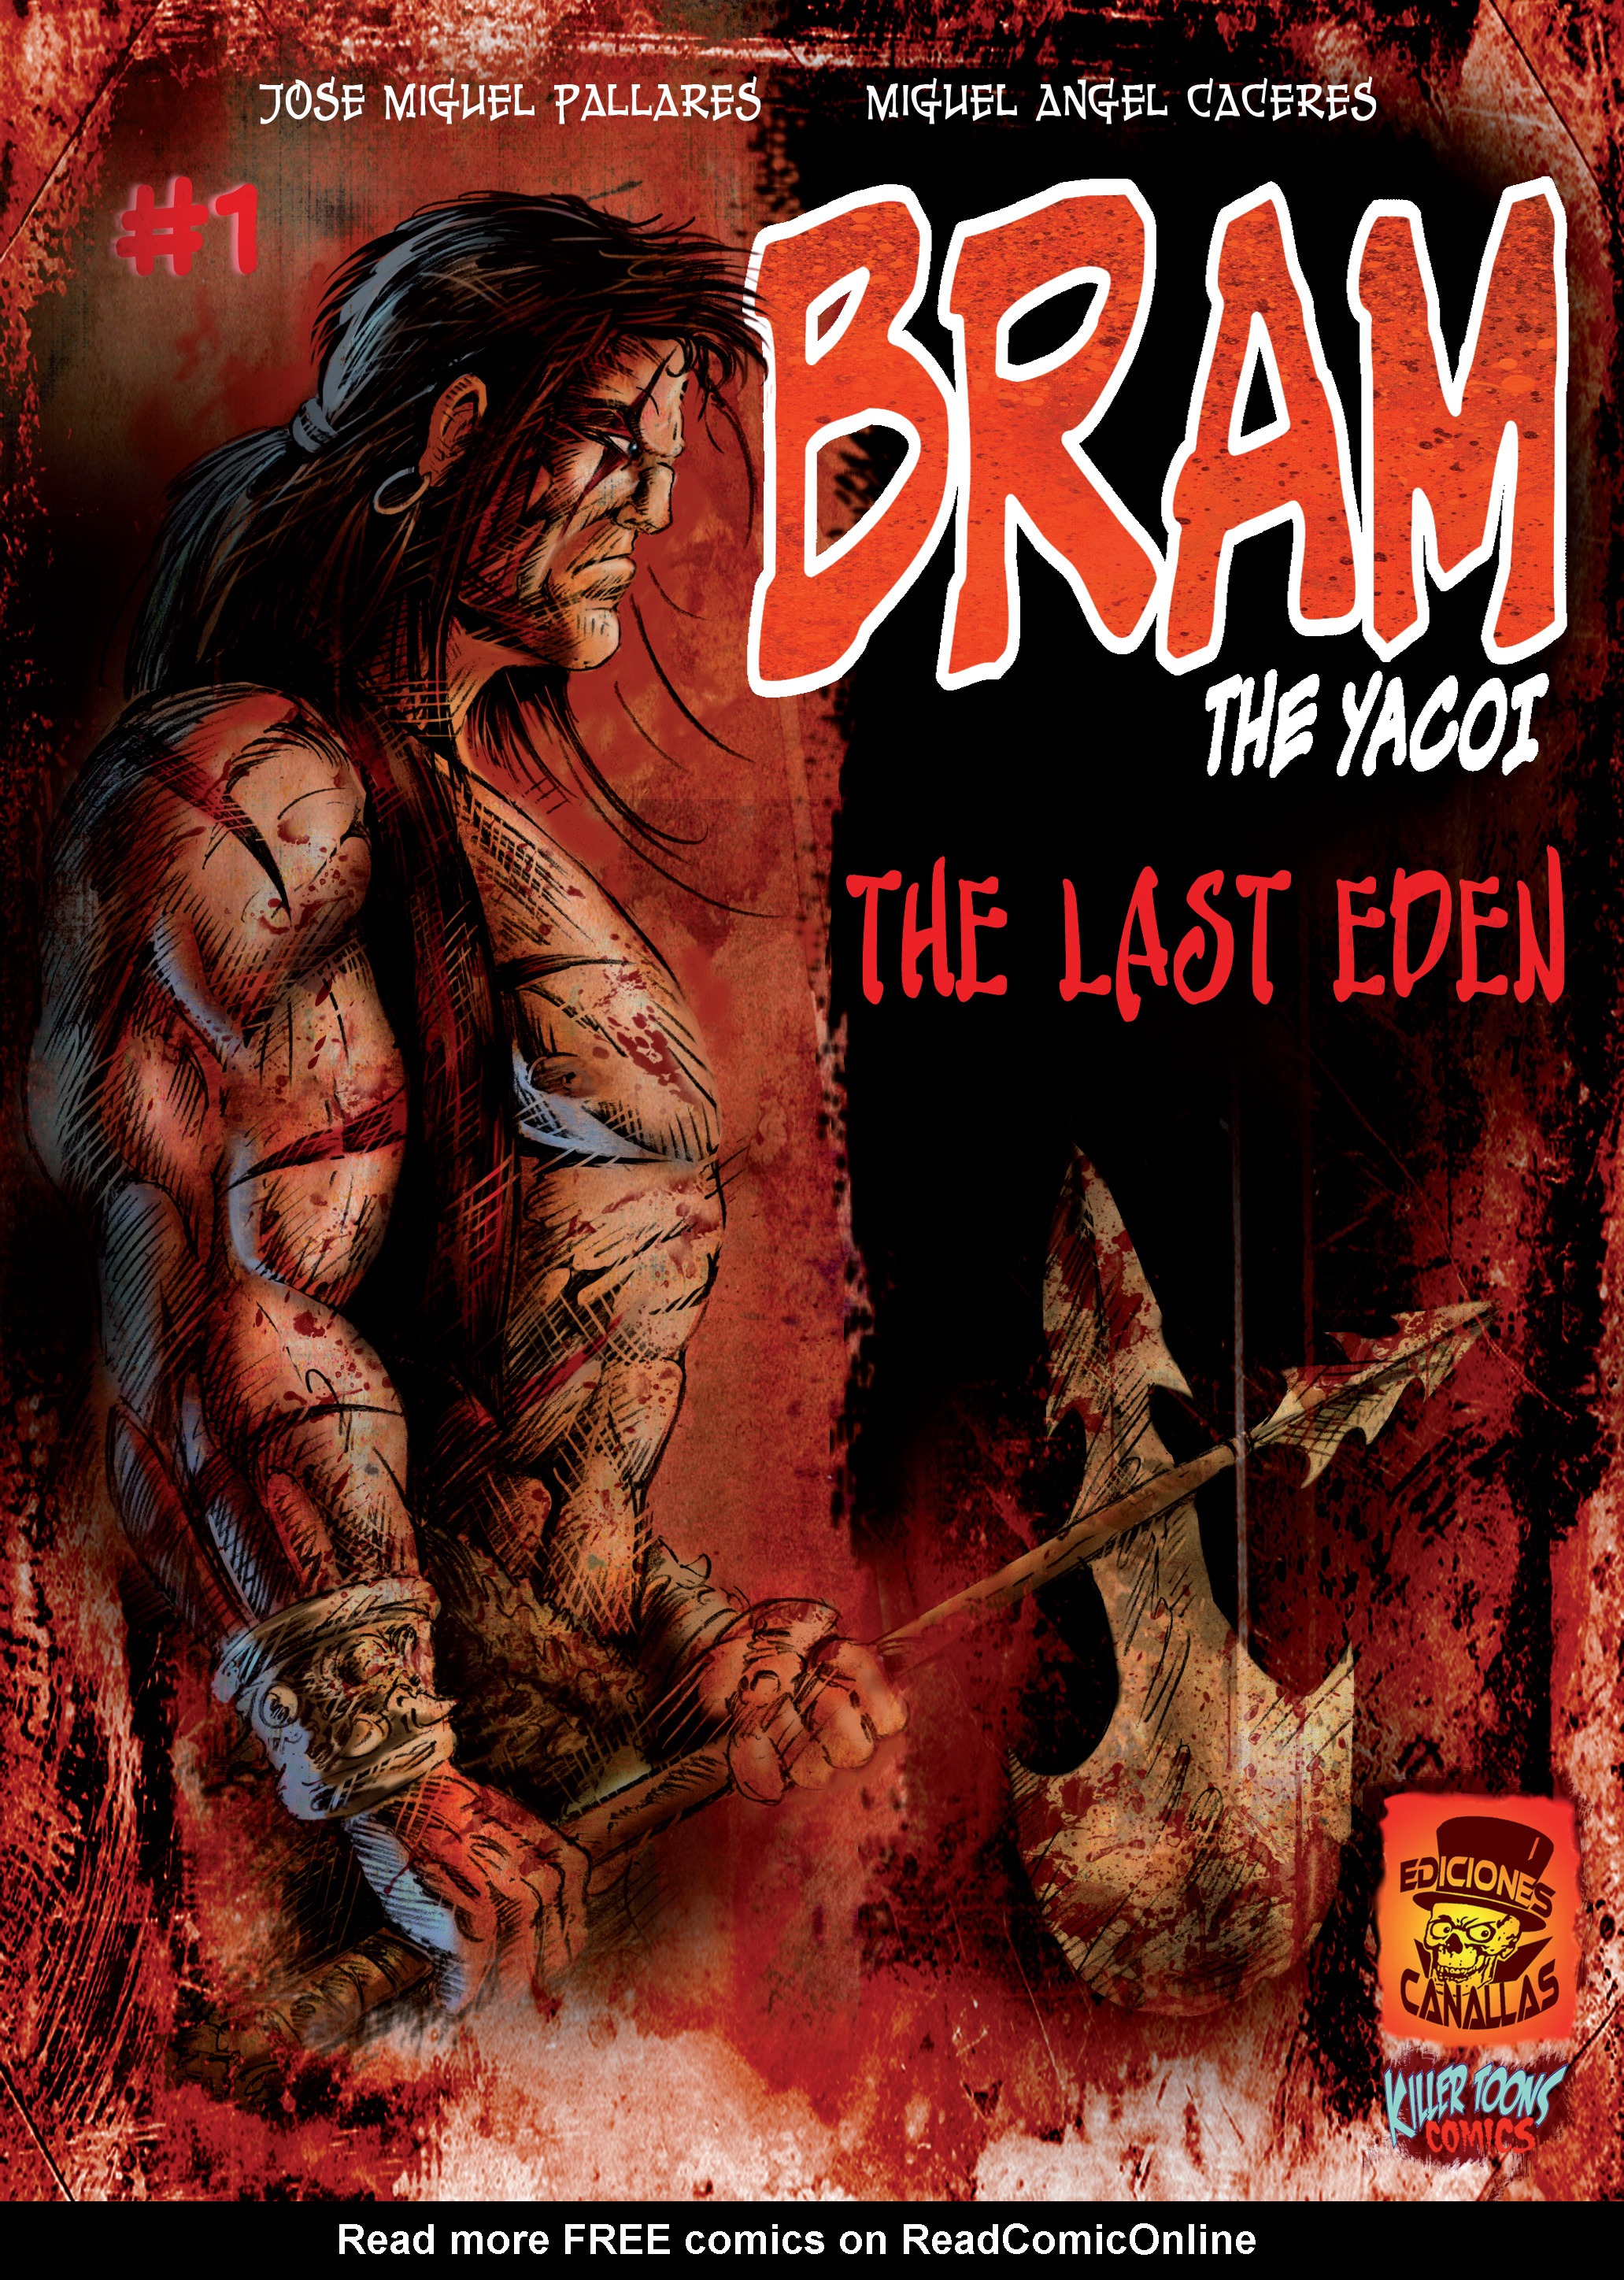 Read online Bram the Yacoi comic -  Issue #1 - 1